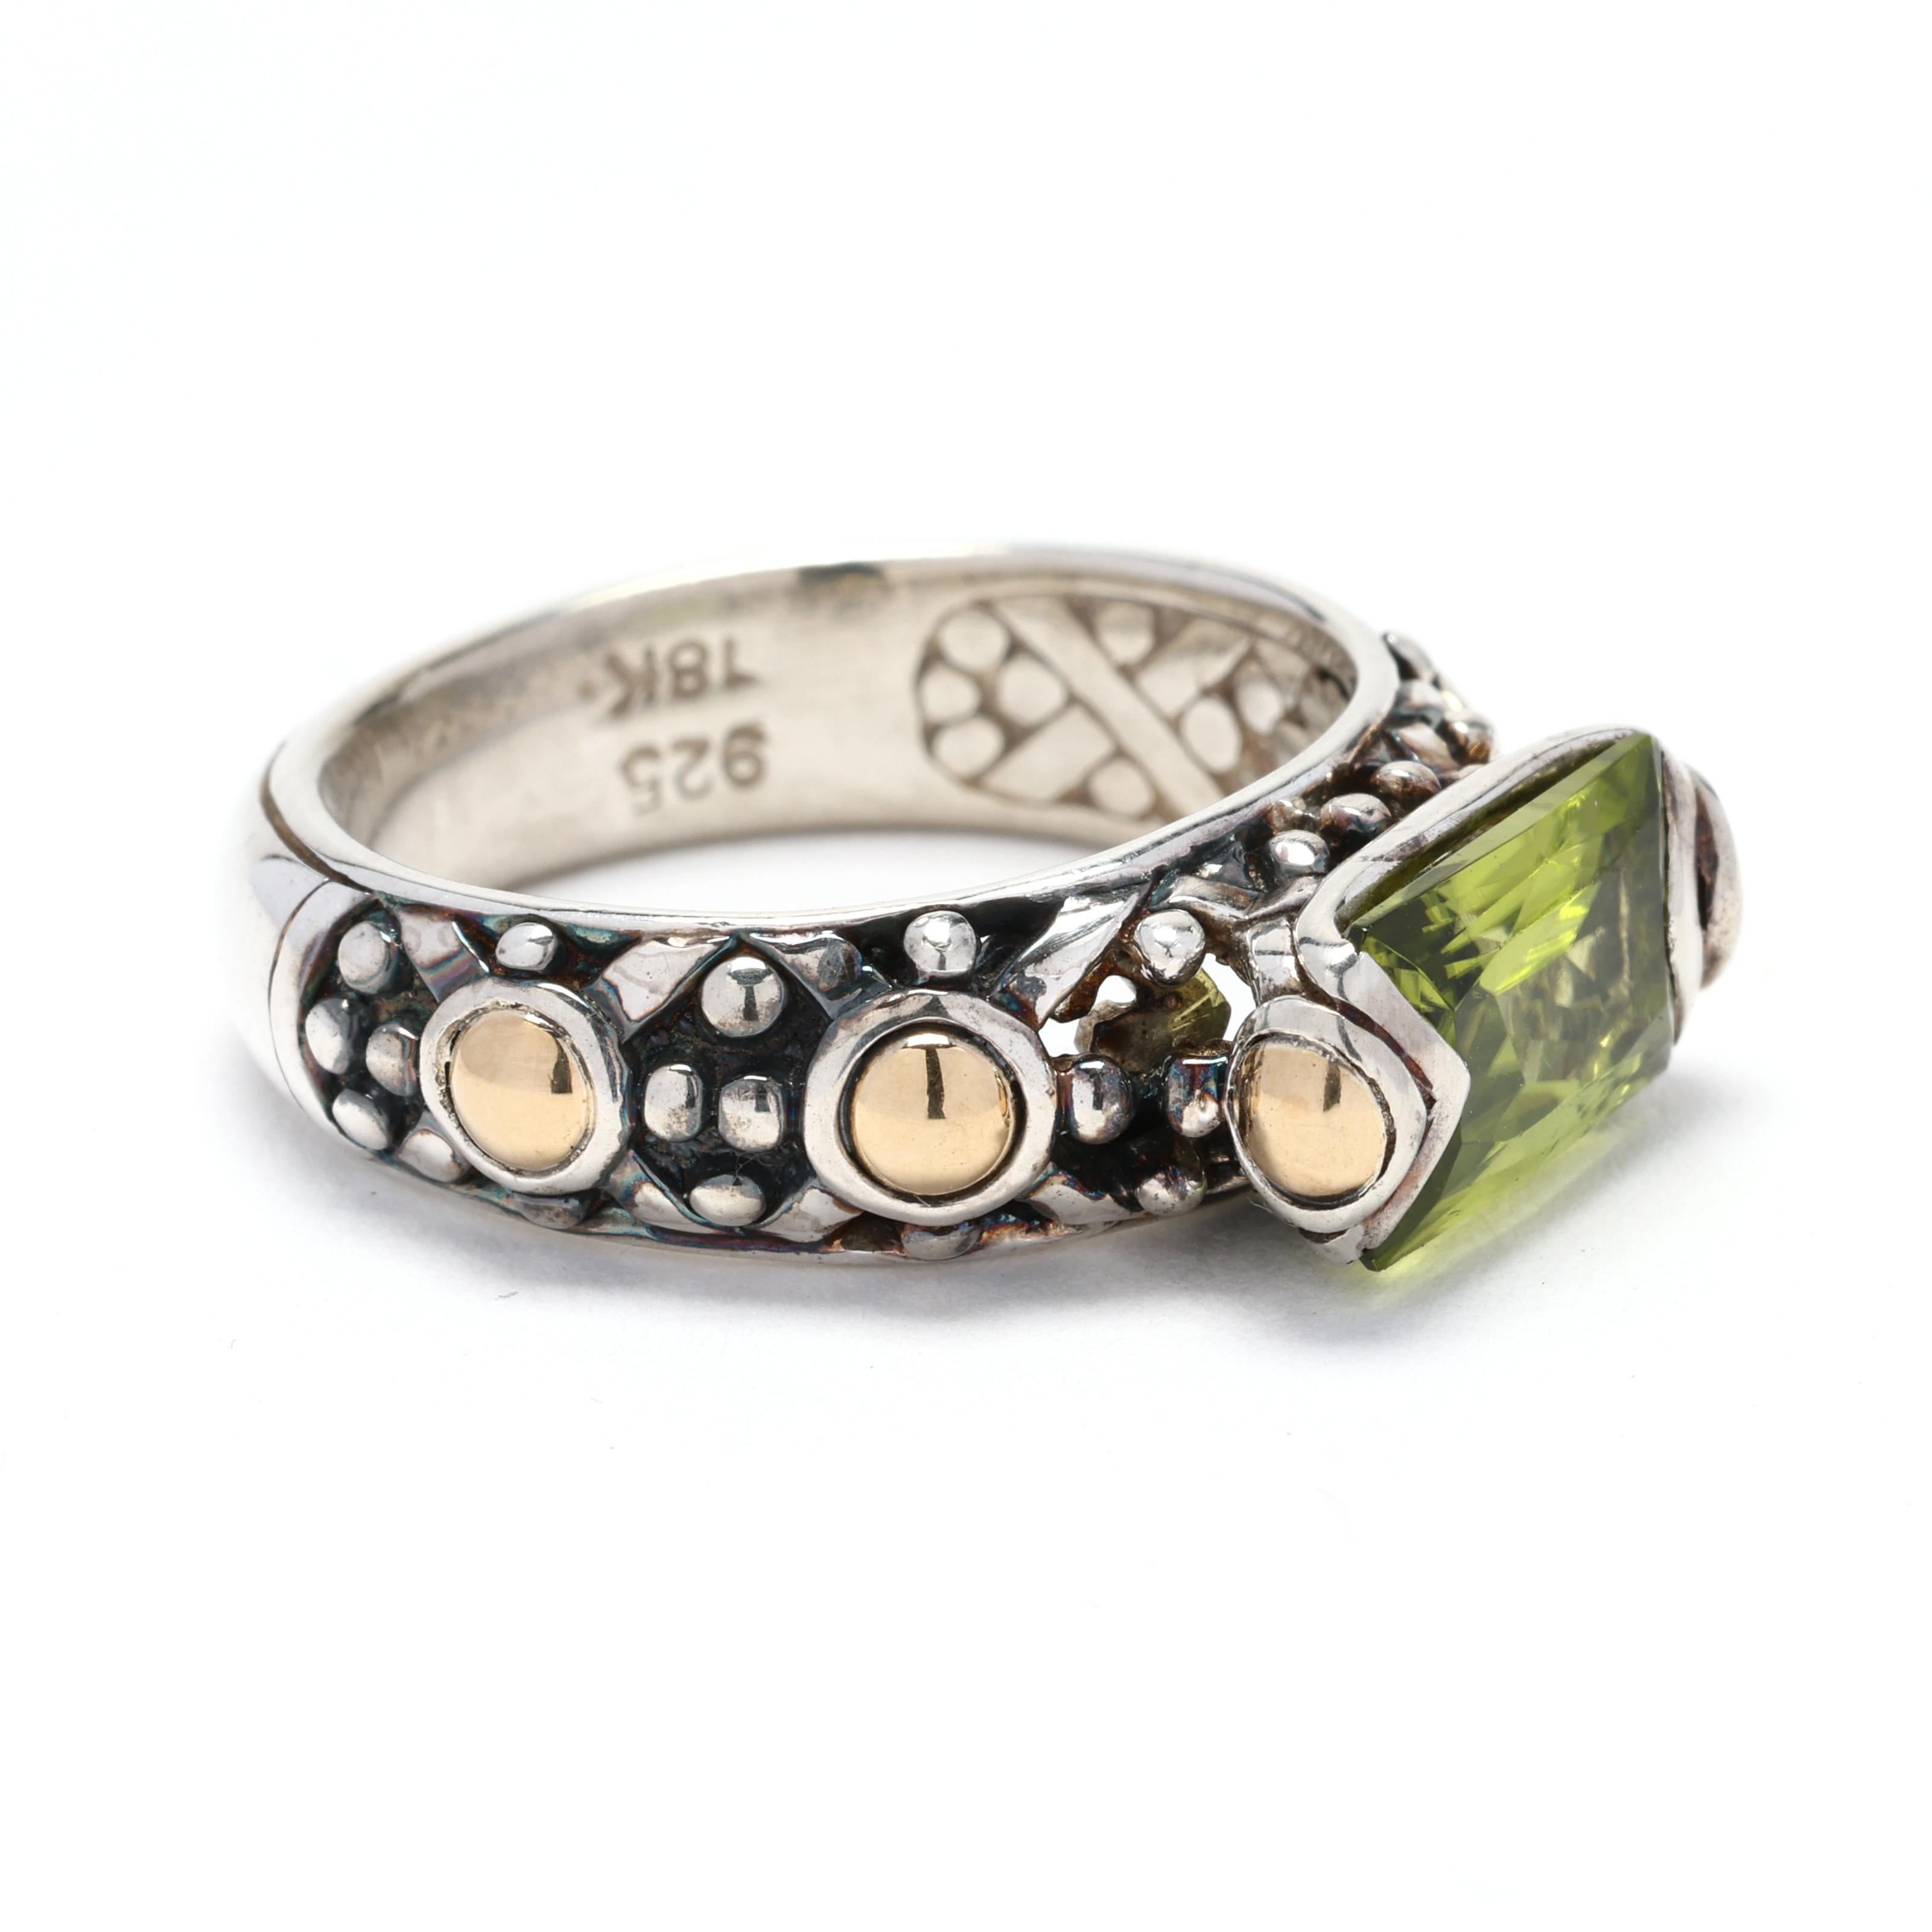 The John Hardy Peridot Band Ring is a captivating piece of jewelry that combines luxurious materials with unique design elements. Crafted in 18k yellow gold and sterling silver, this ring features a stunning peridot gemstone that adds a vibrant pop